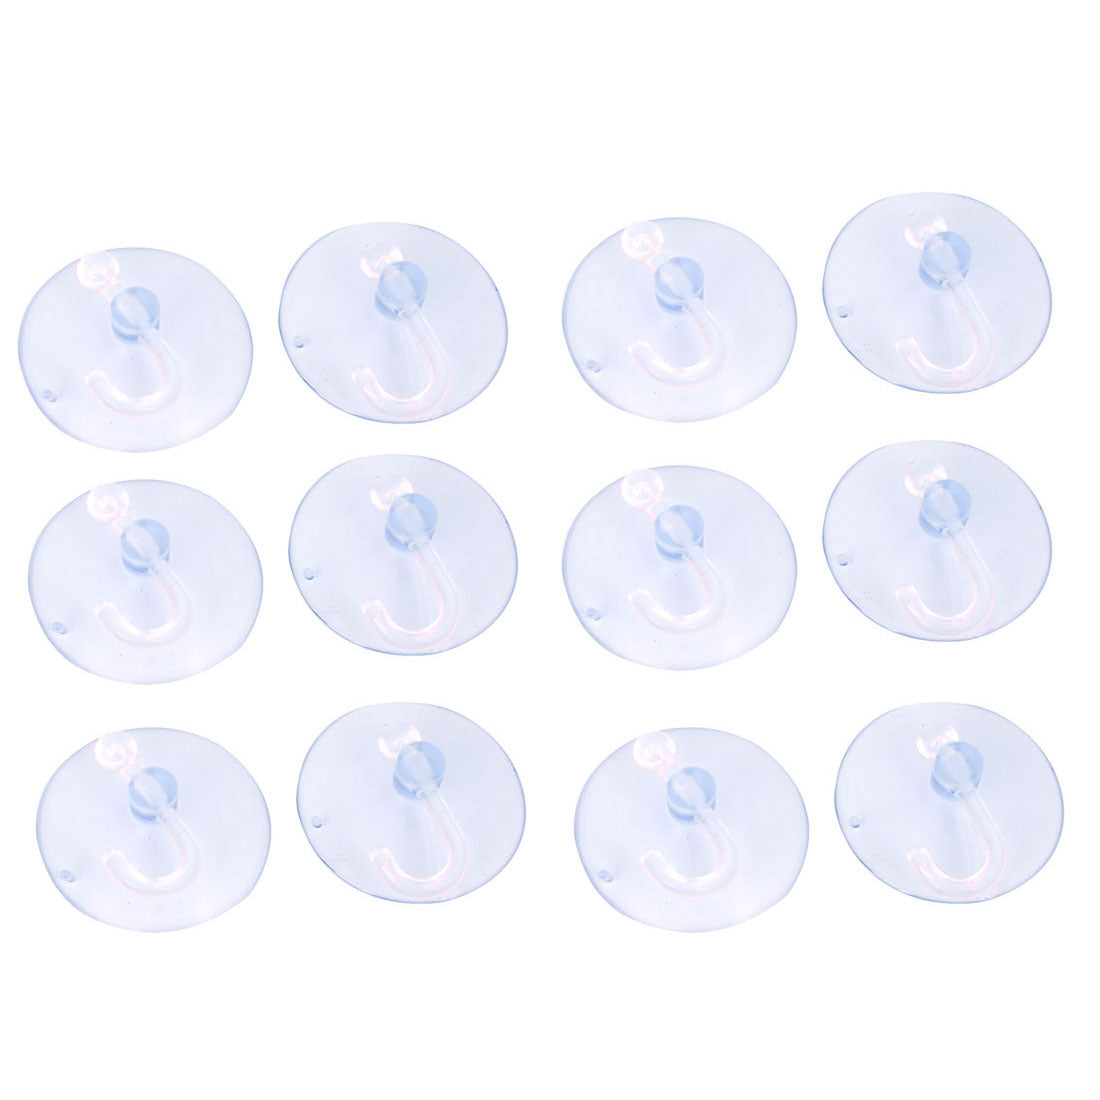 uxcell Uxcell 50mm Dia Home Bathroom Wall Window Plastic Suction Cup Hook Clear Blue 12Pcs